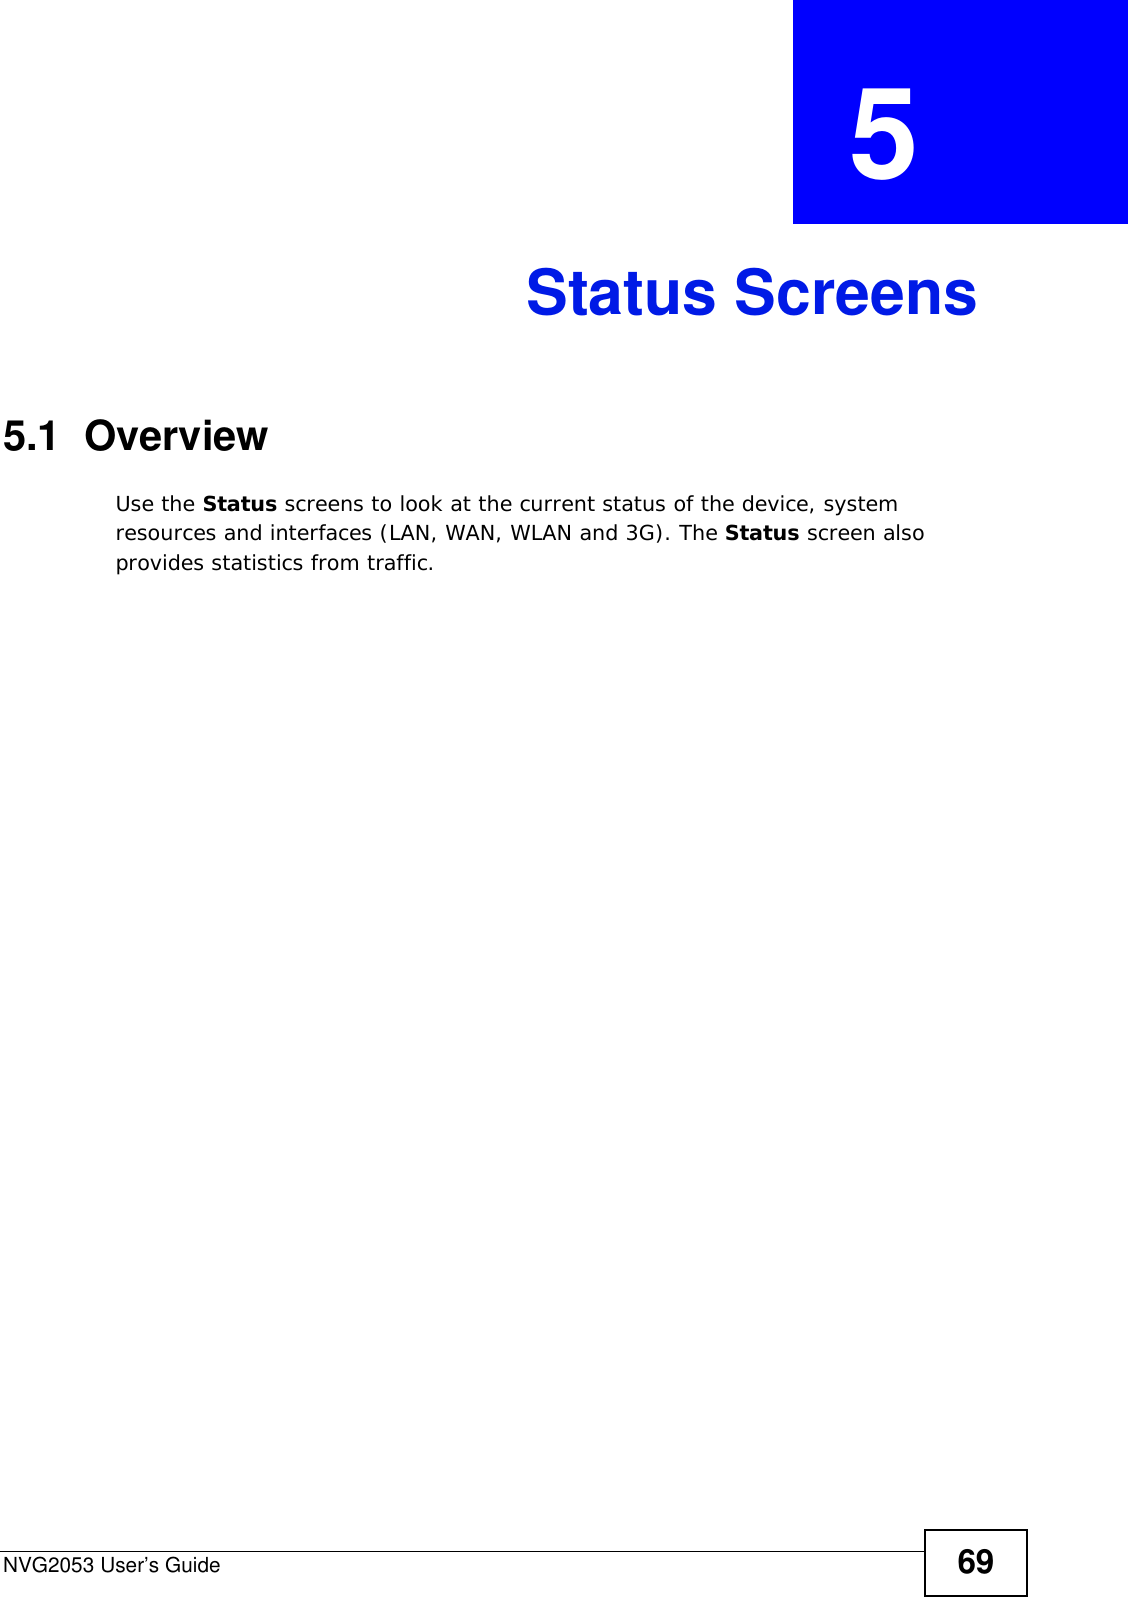 NVG2053 User’s Guide 69CHAPTER  5 Status Screens5.1  OverviewUse the Status screens to look at the current status of the device, system resources and interfaces (LAN, WAN, WLAN and 3G). The Status screen also provides statistics from traffic.